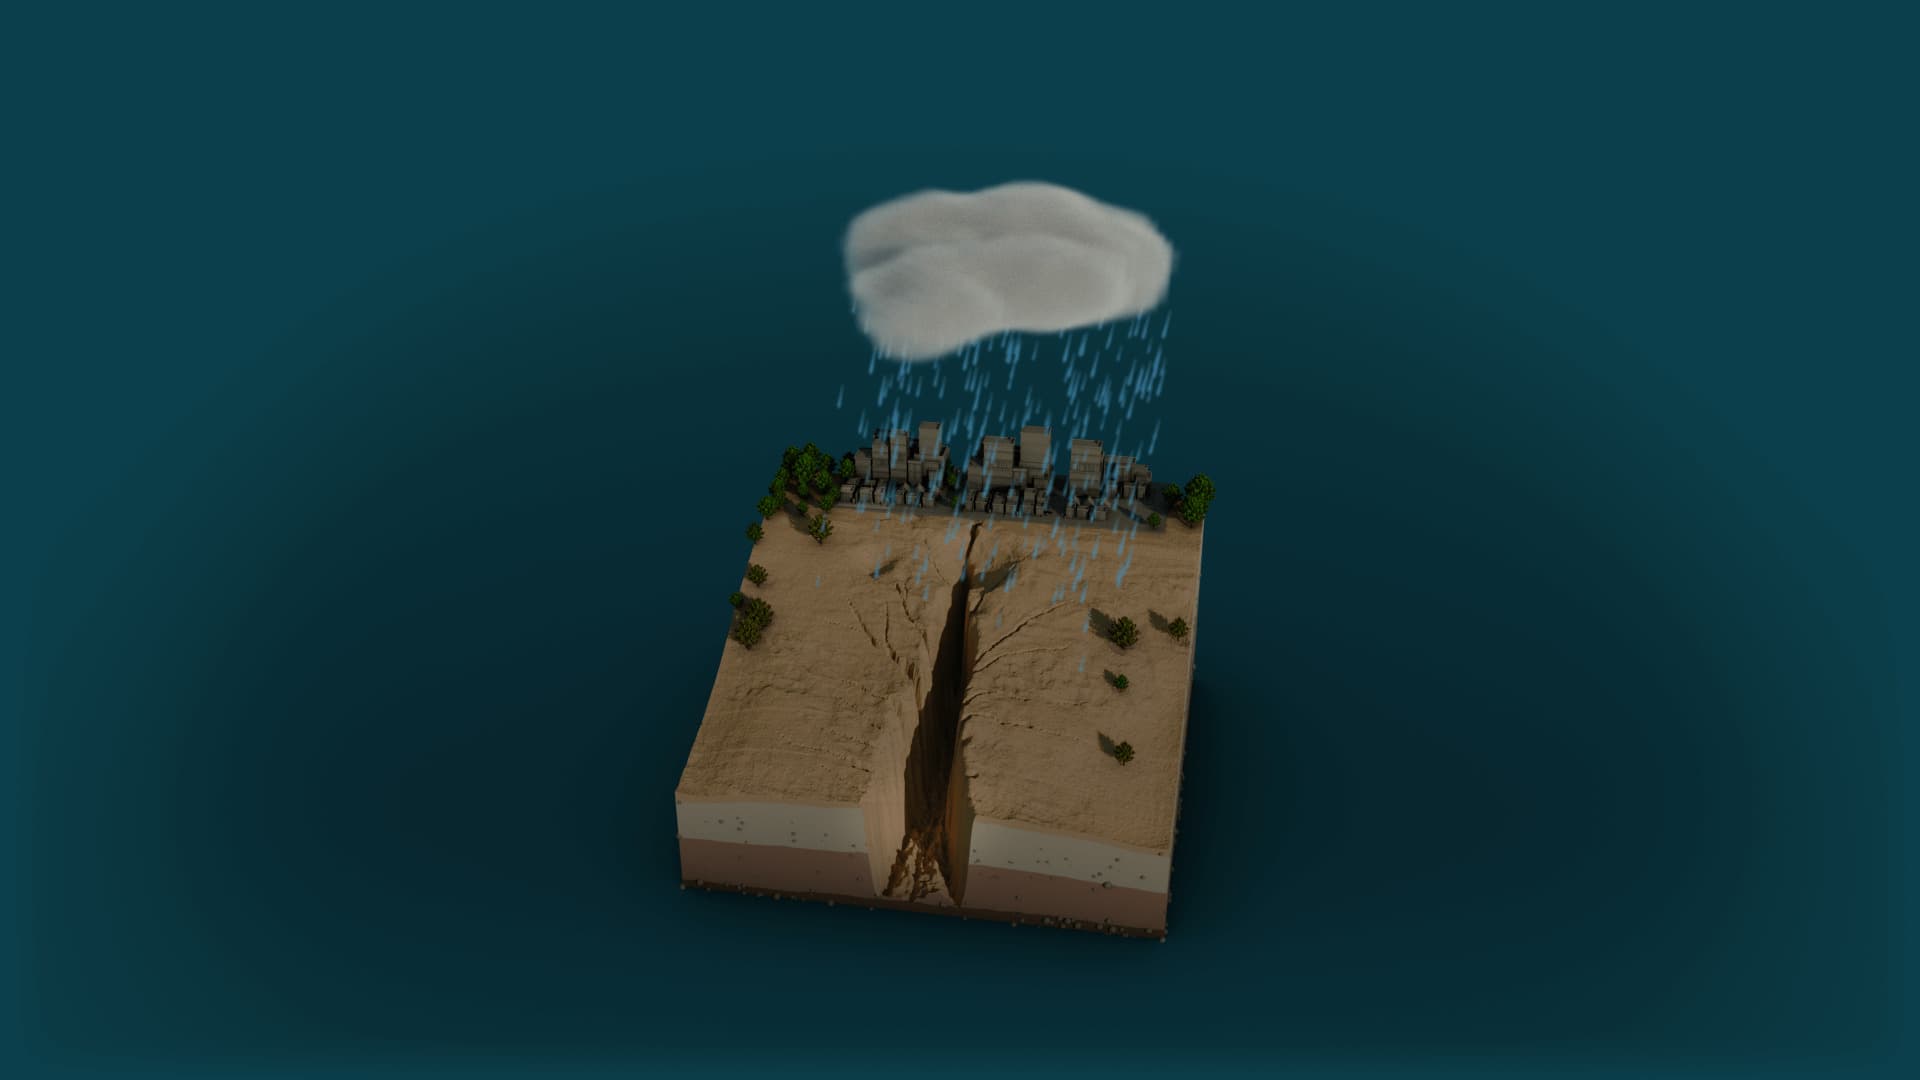 Animation showing a gully opening up